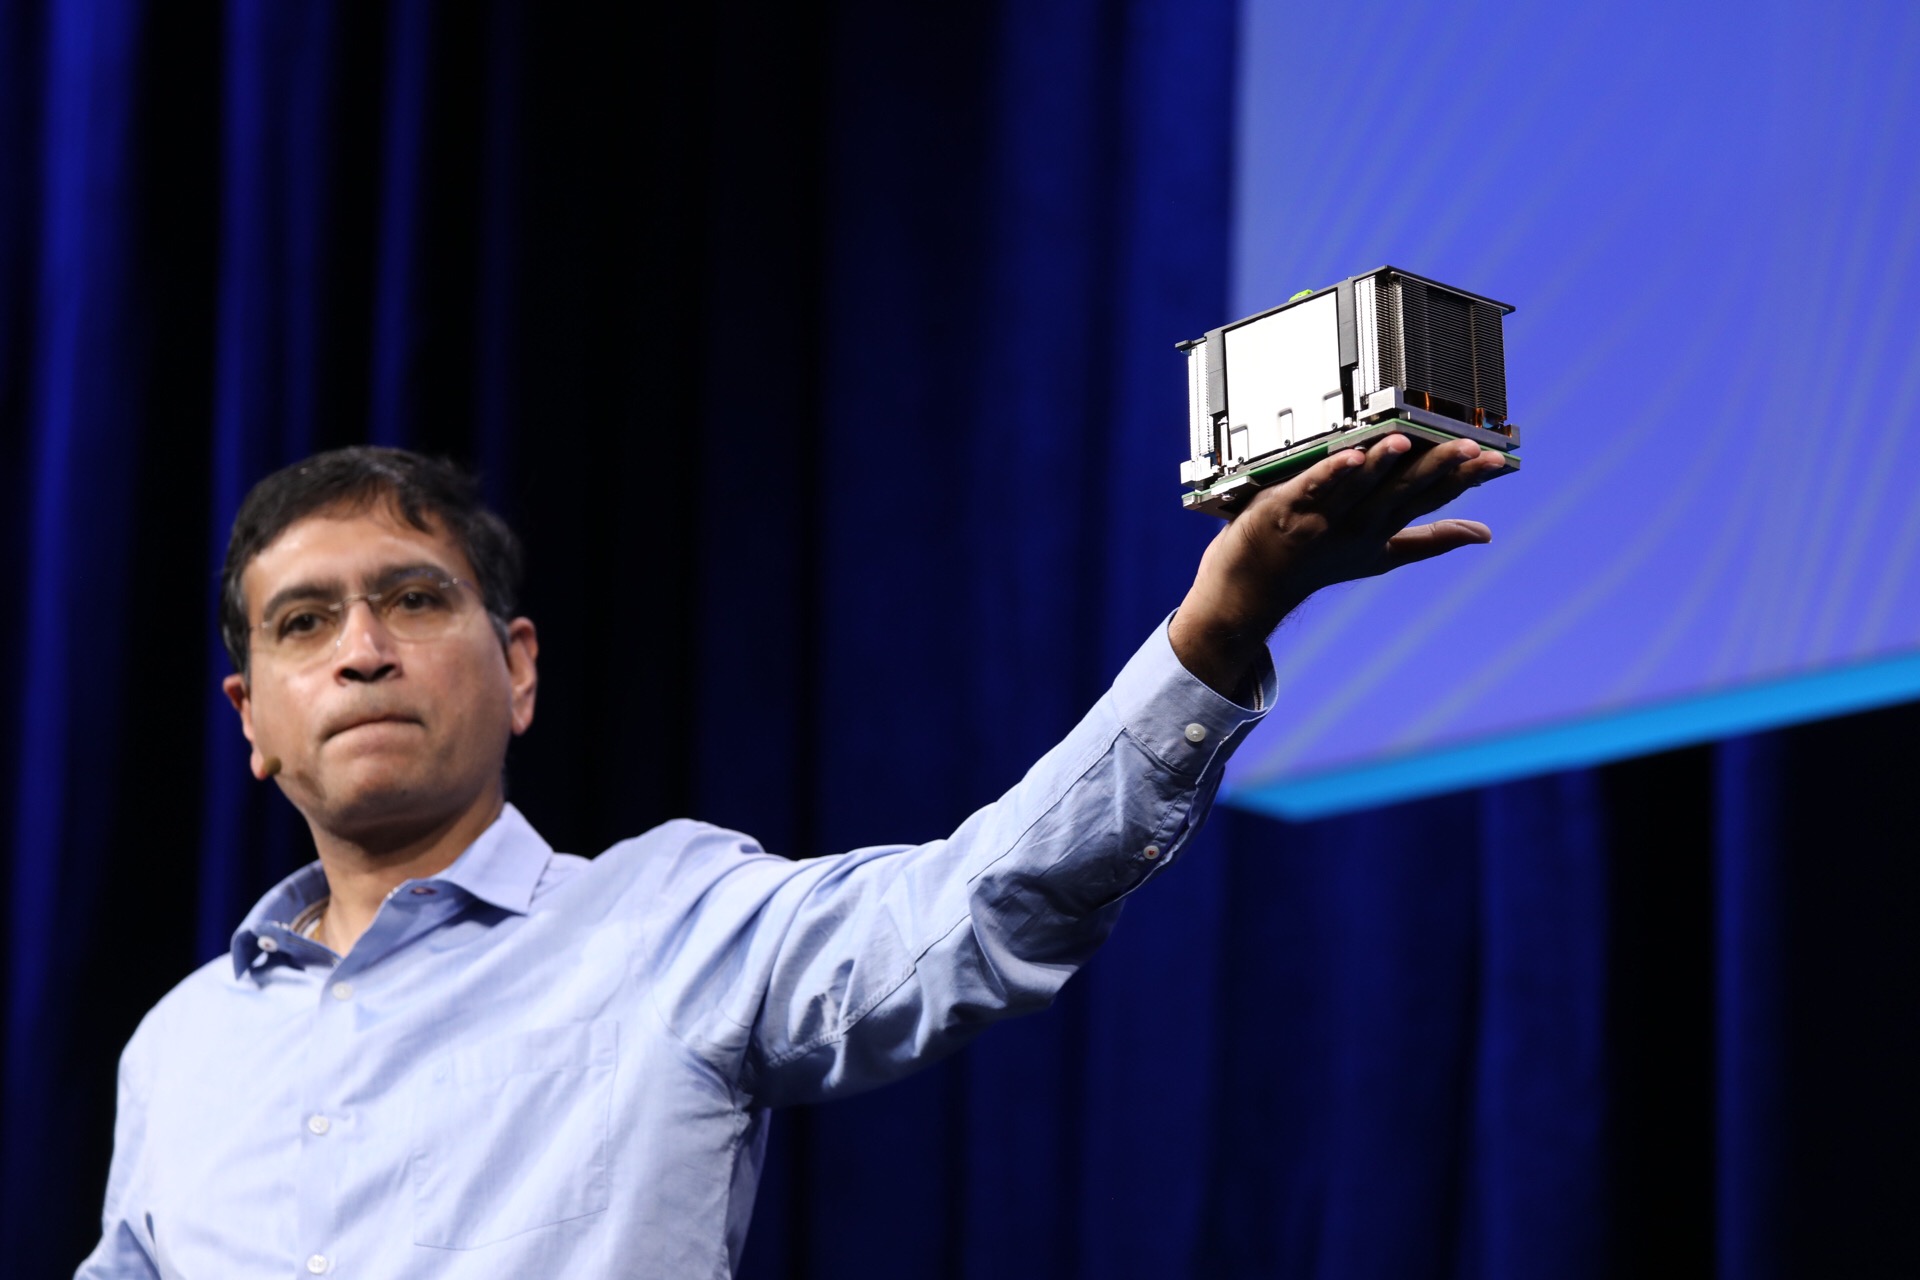 Vijay Rao, Facebook director of technology and strategy, holding up an OCP accelerator module during a keynote at the 2019 OCP Summit